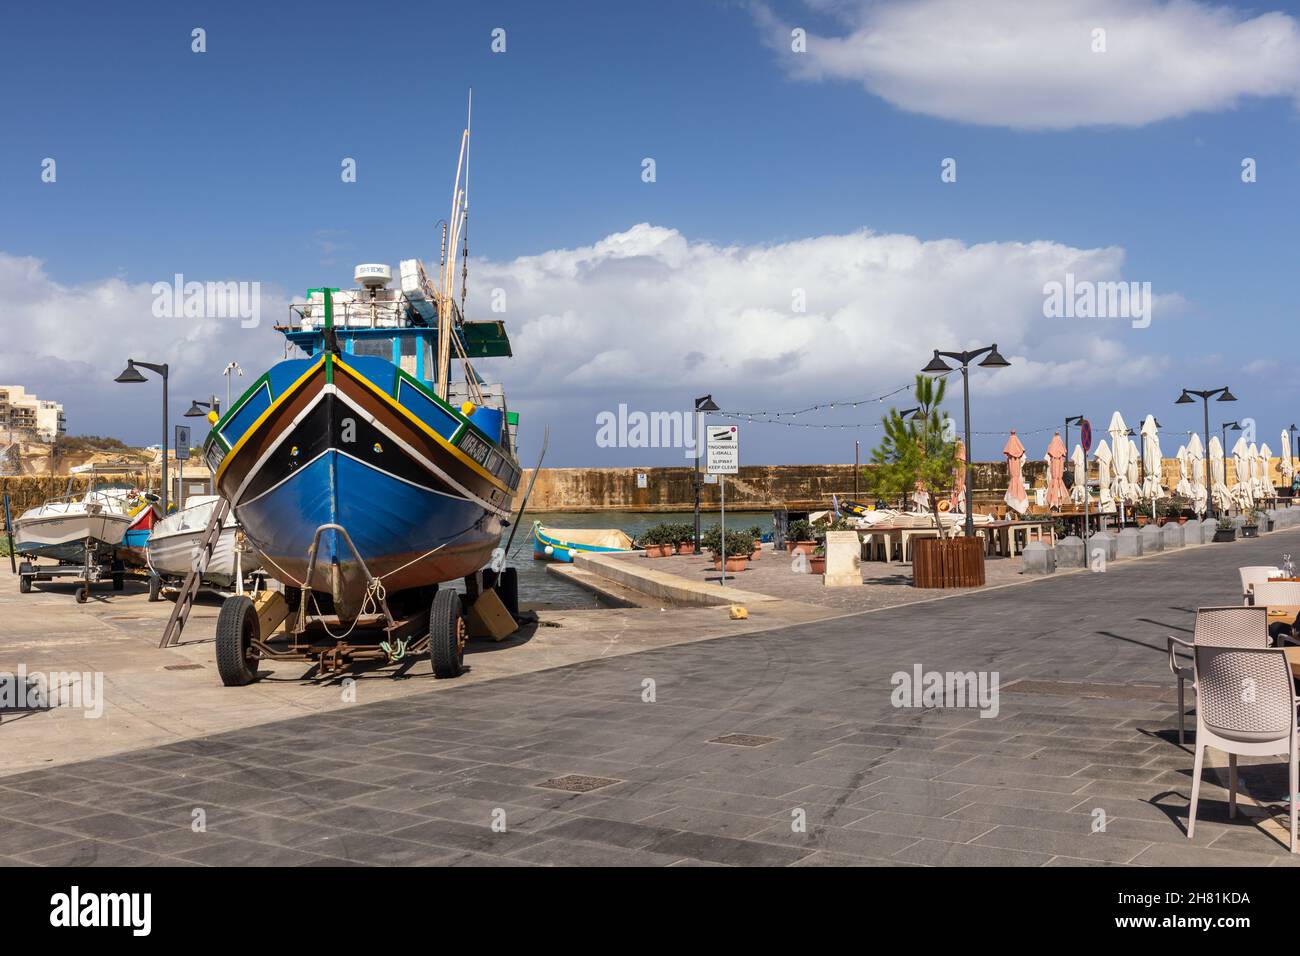 A colourful fishing boat on the waterfront in the fishing village of  Marsalforn, Marsalforn Bay, Gozo, Malta, Europe Stock Photo